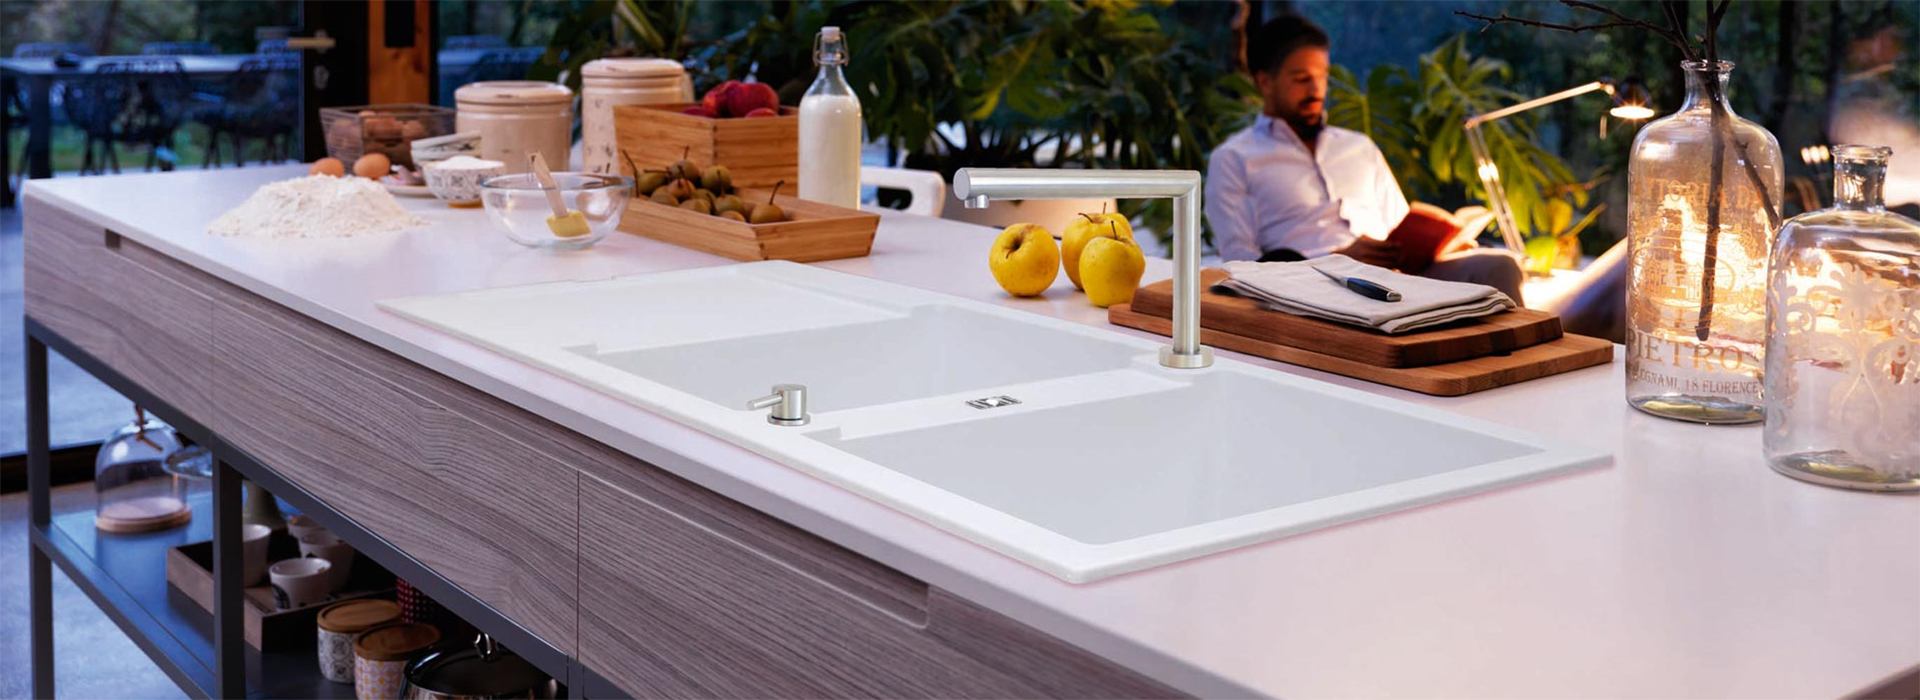 Finding The Franke Sink That’s Right For You